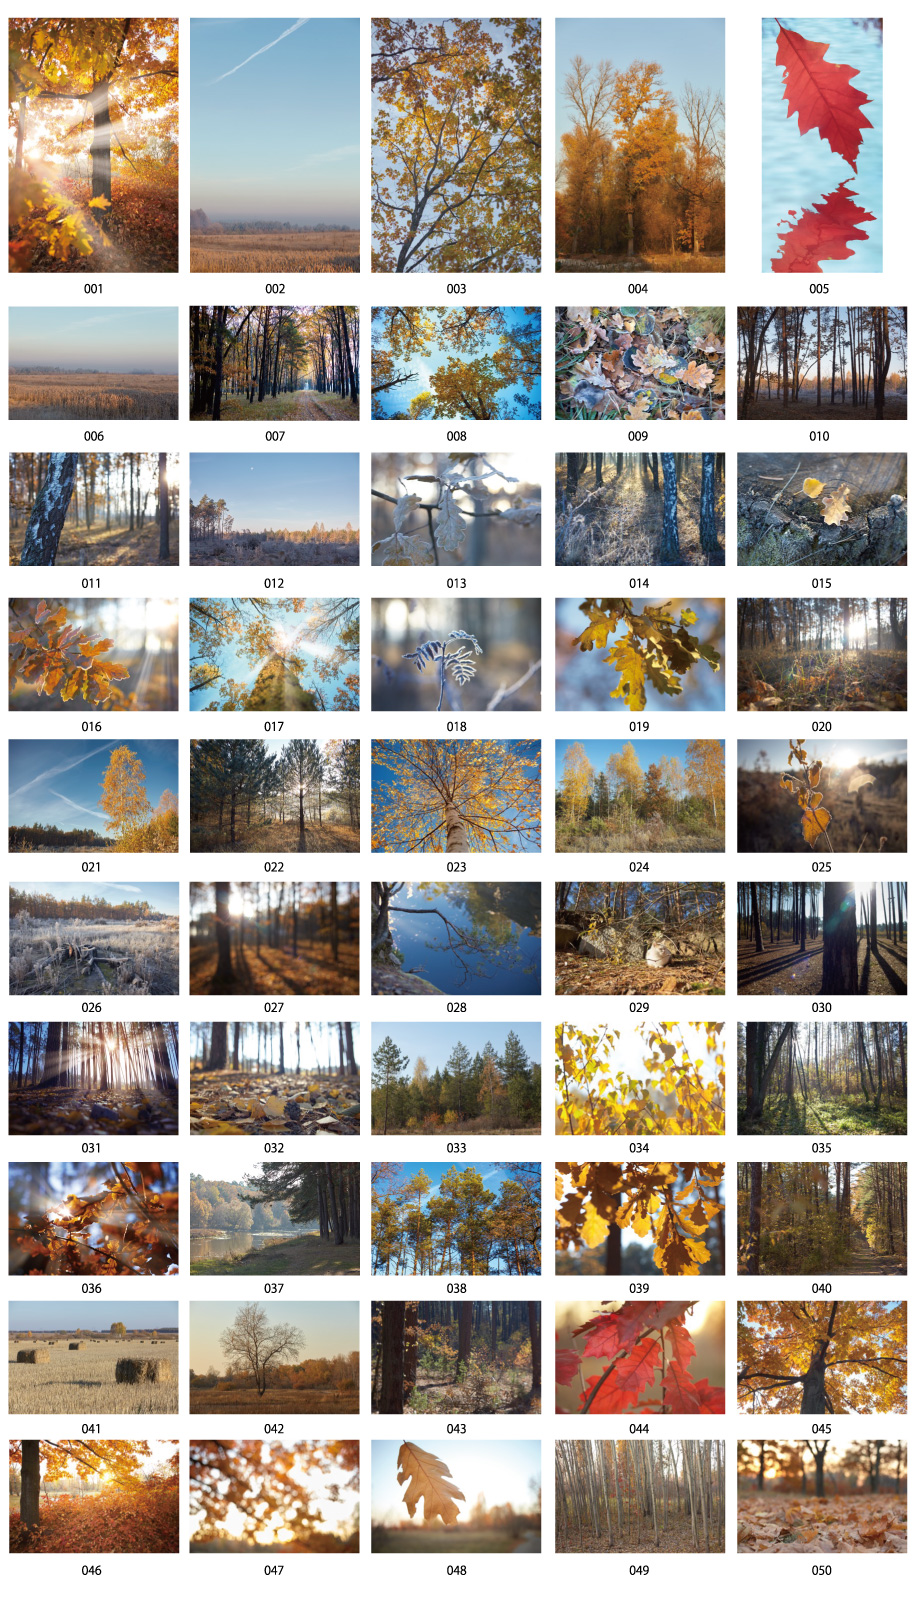 Winter Forest Stock Photos